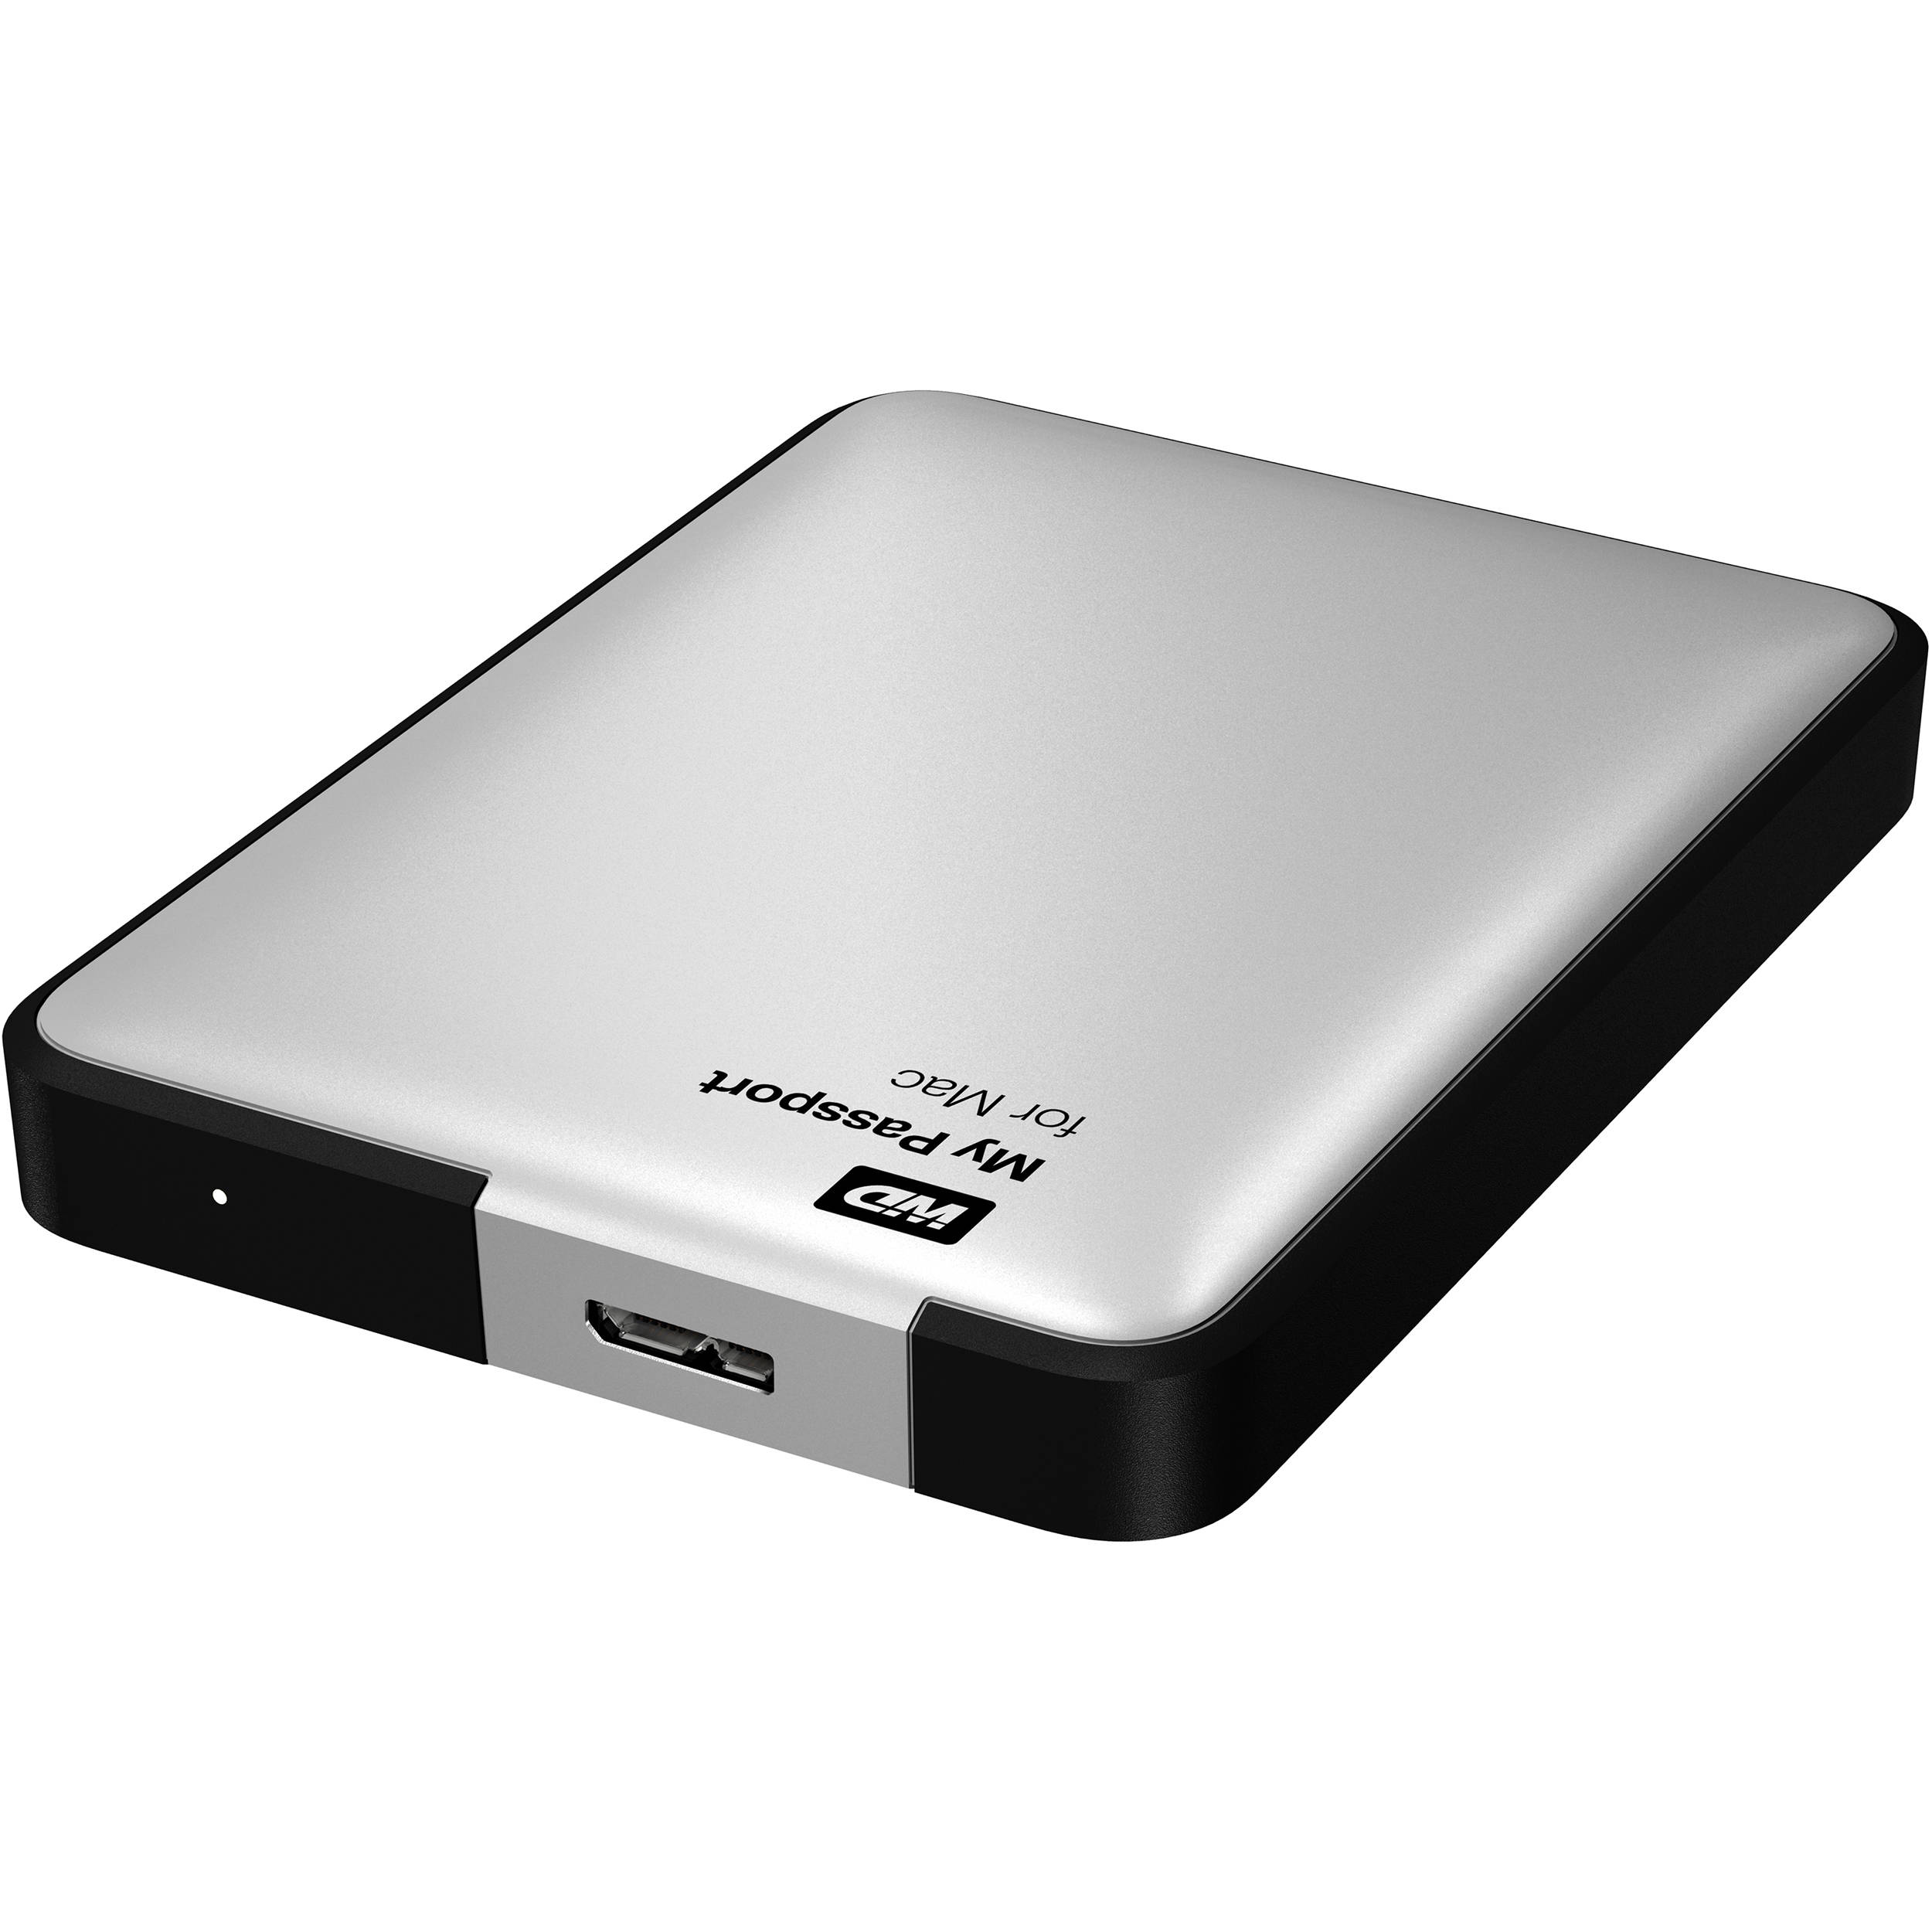 Wd my passport pro 2tb portable hard drive for macbook